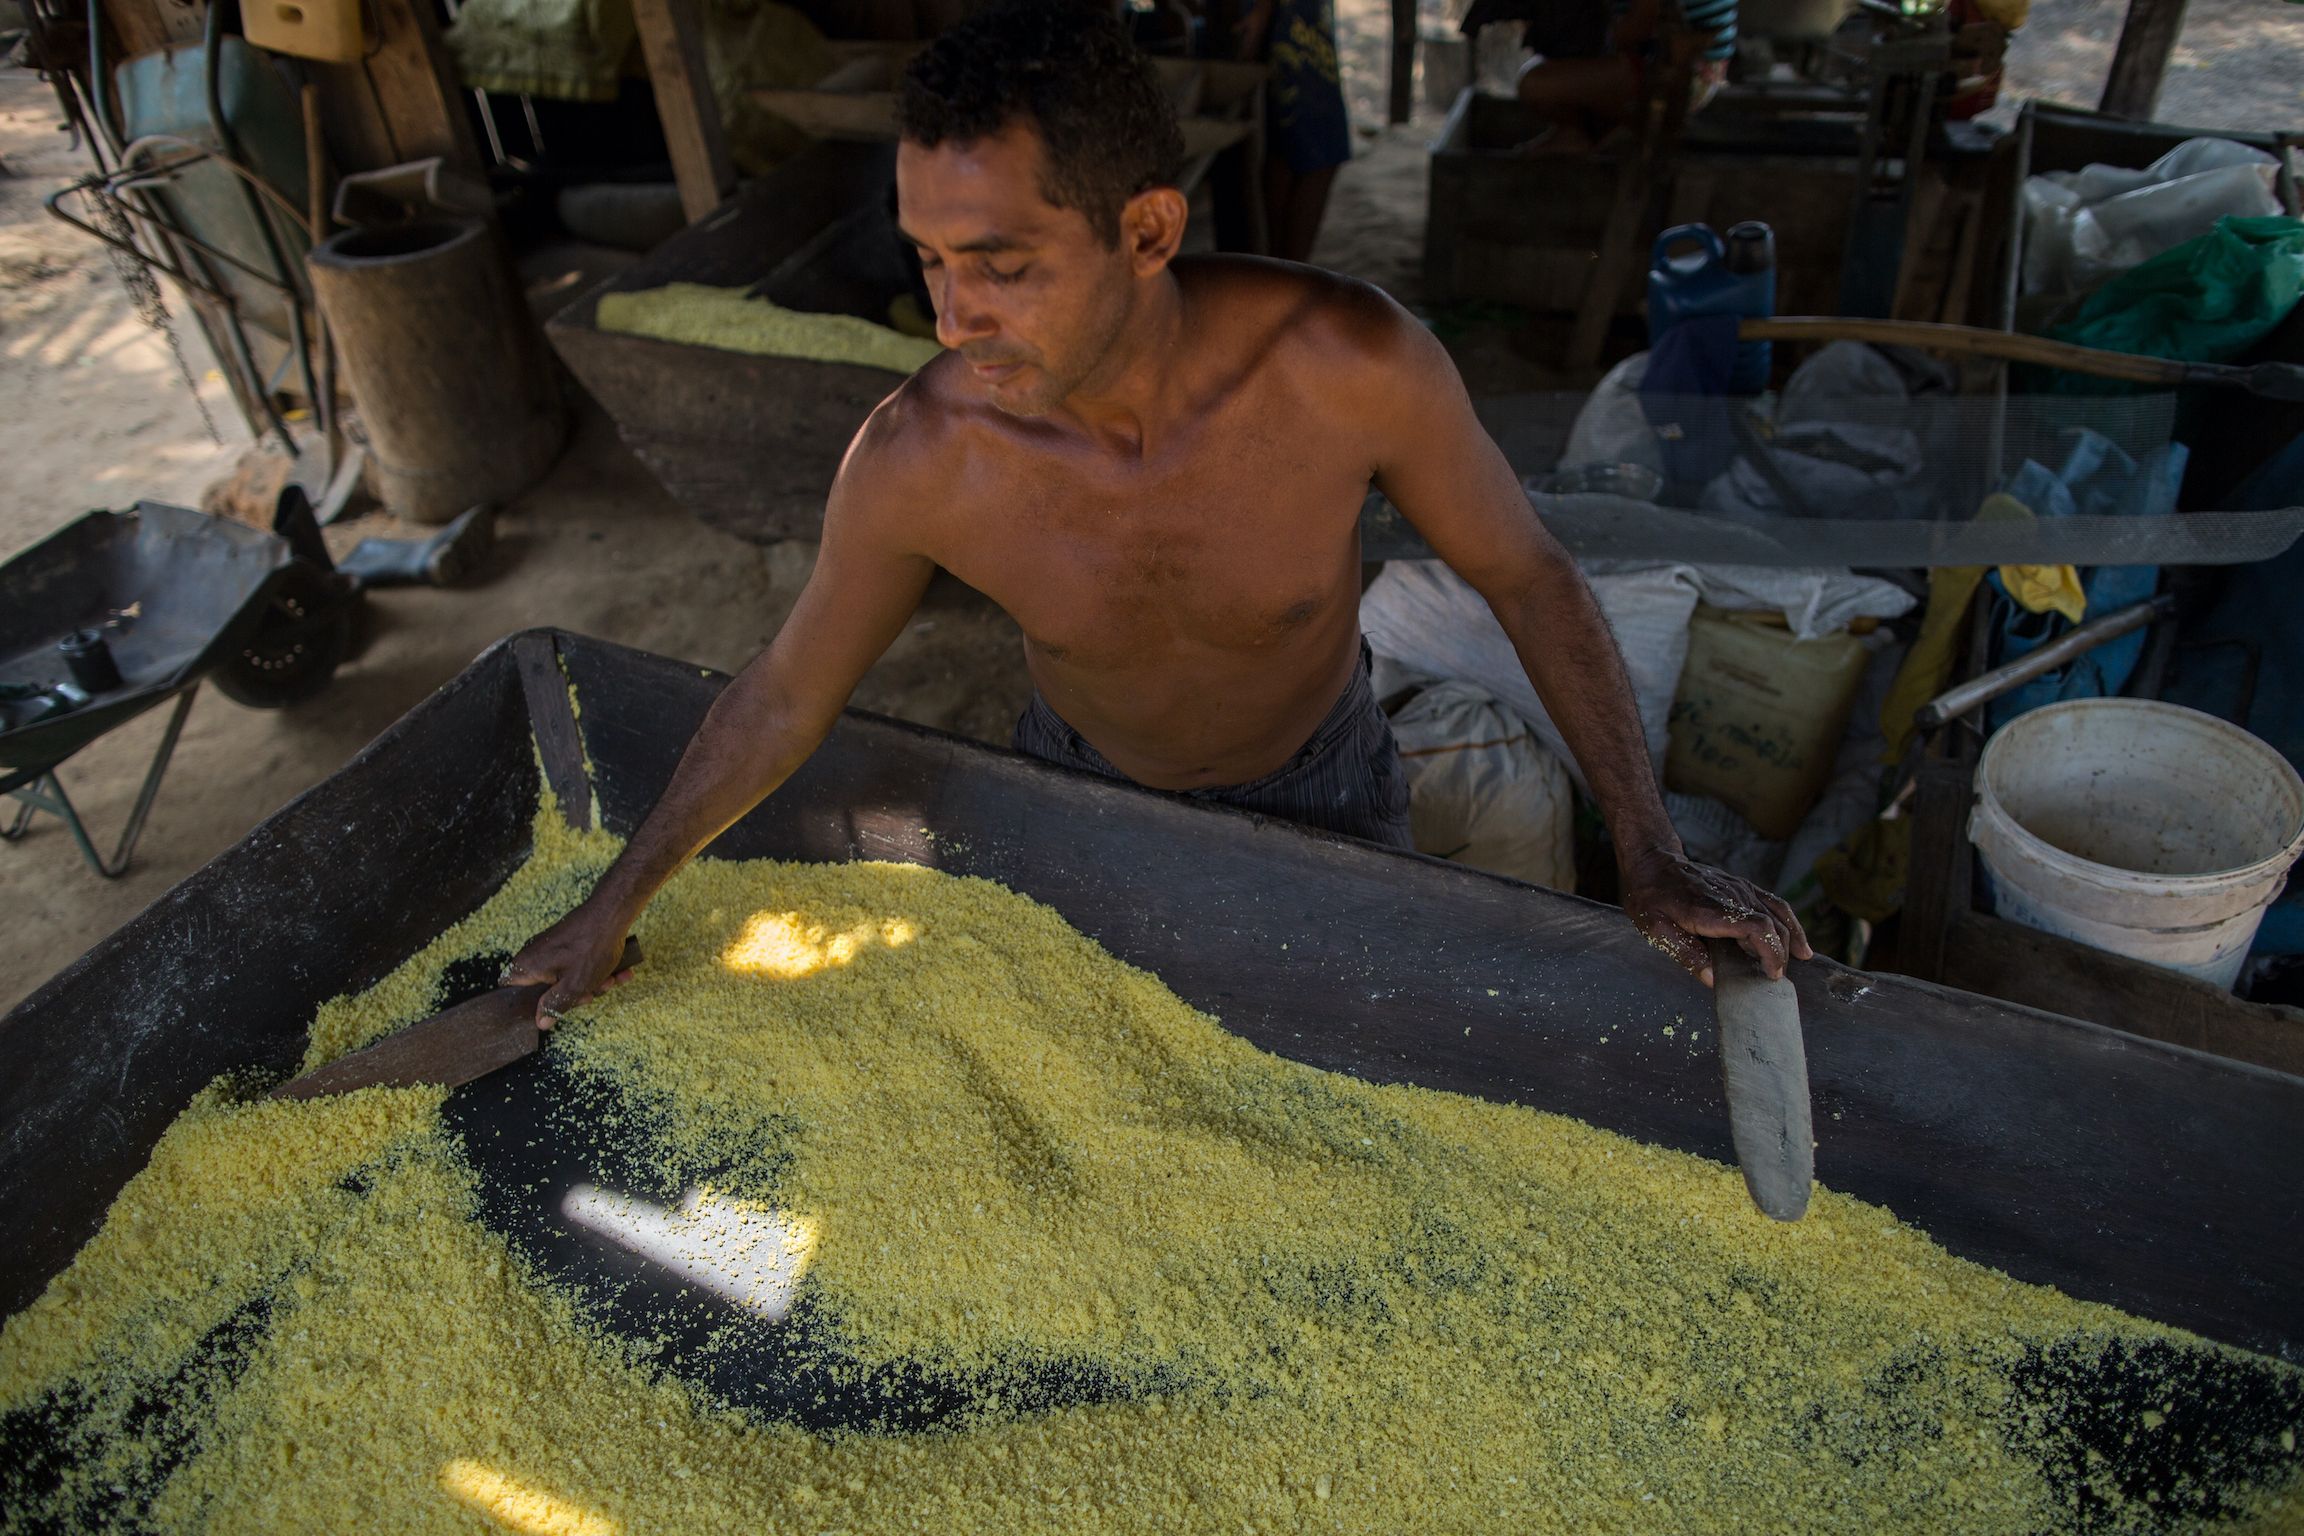 Preparation of cassava flour in Tapajós National Forest. Cassava is the main crop of the riverine people, cultivated with the use of controlled burning. Image by Flavio Forner.
